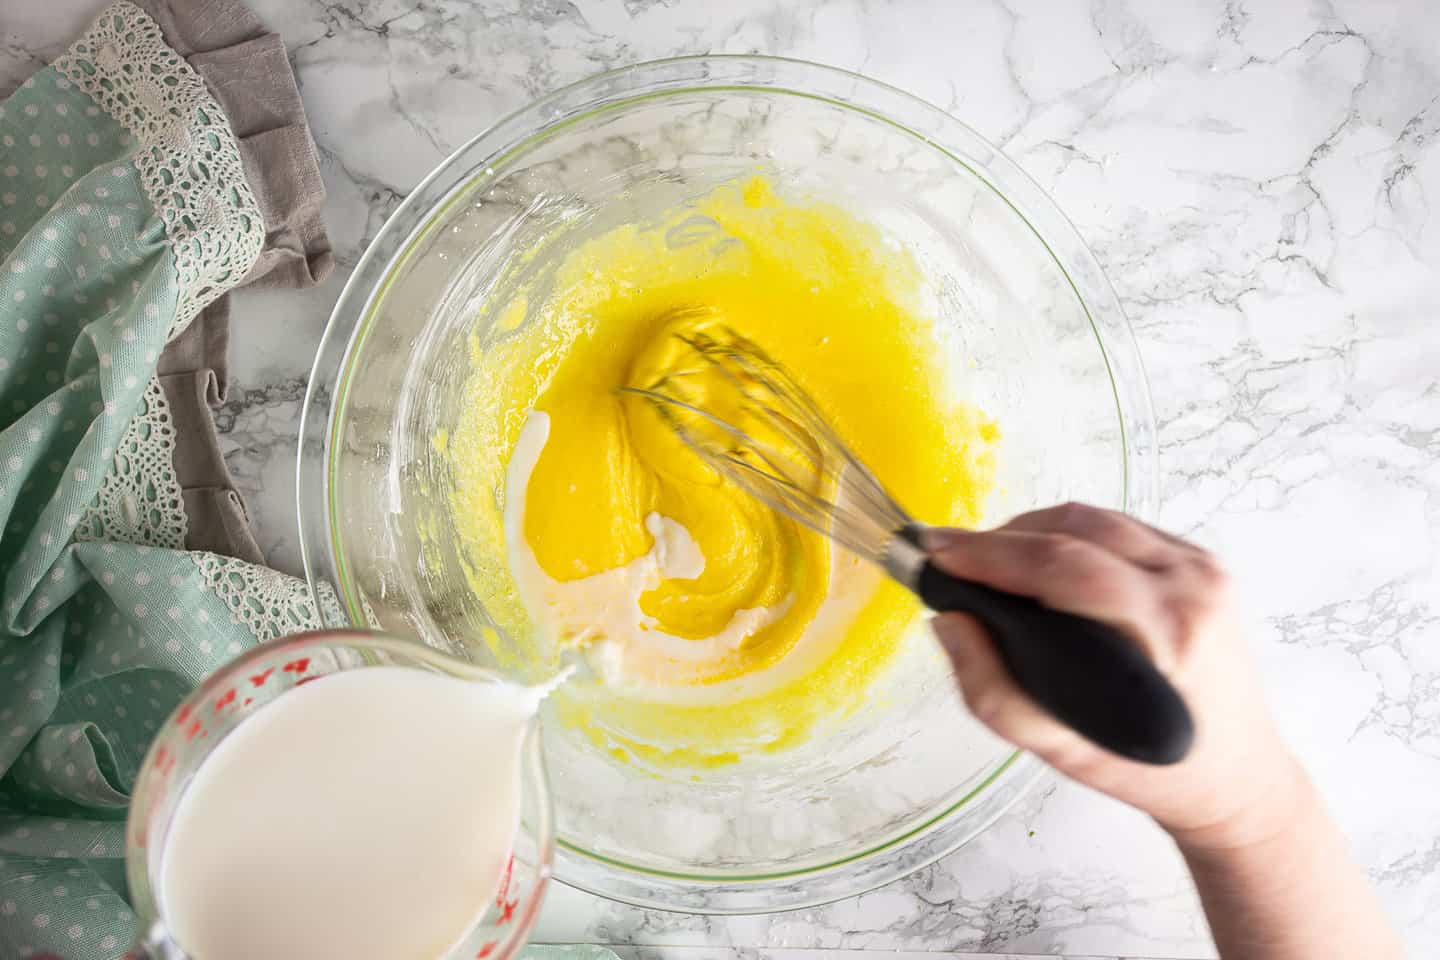 Tempering egg yolks with hot milk.